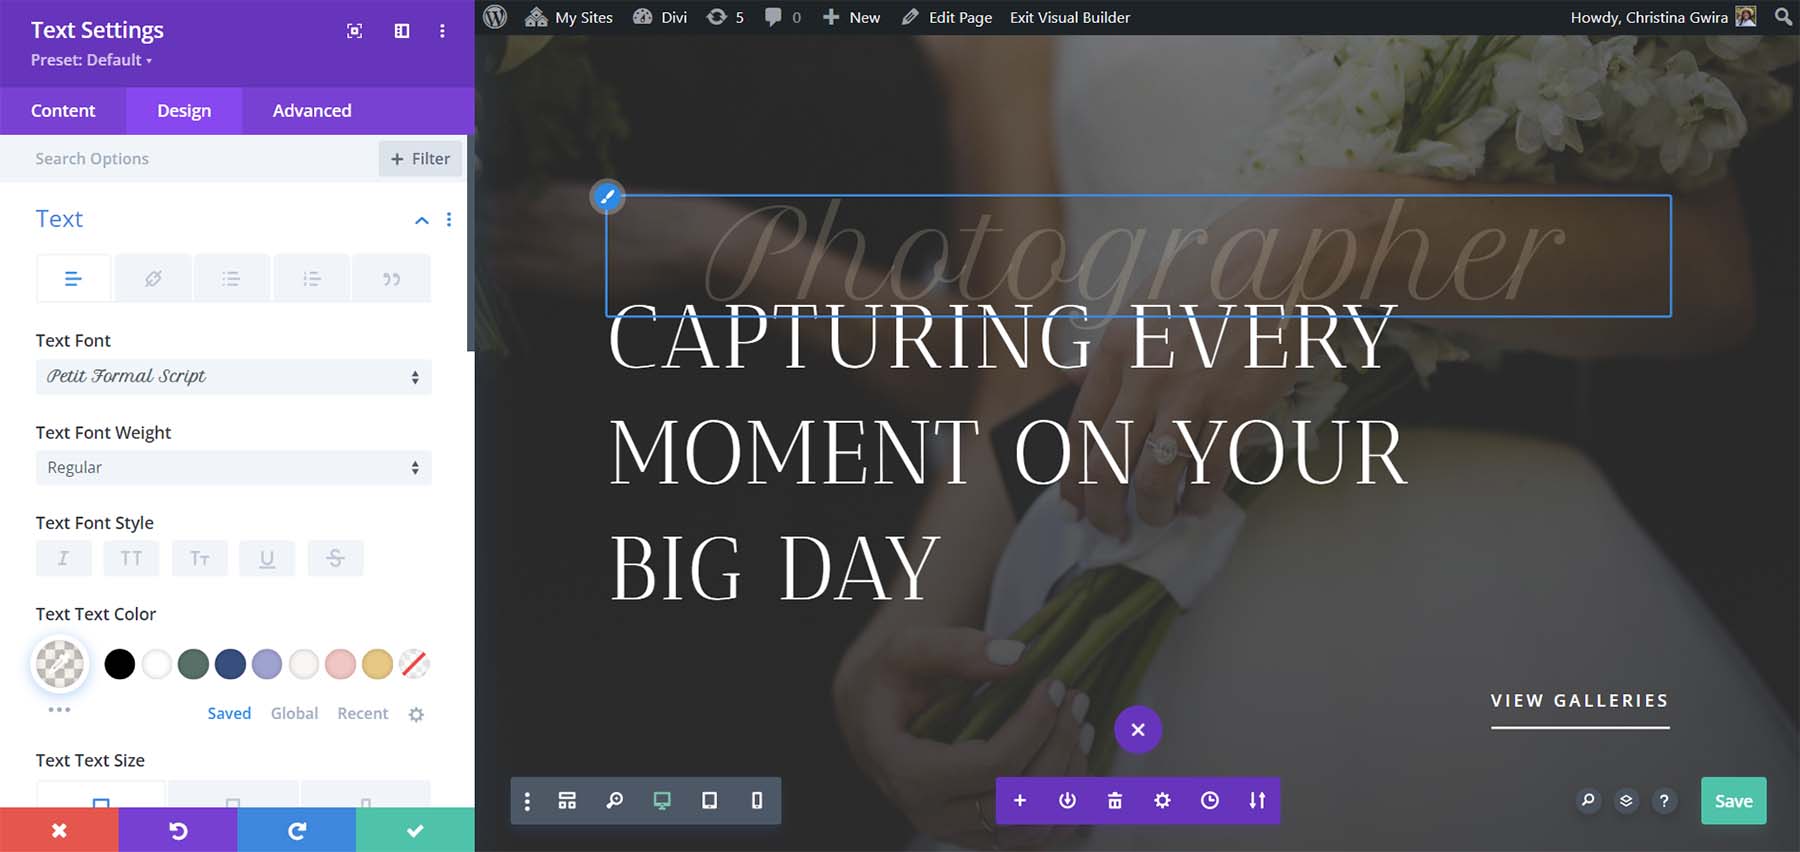 Divi's powerful page builder is easy enough for anyone to use